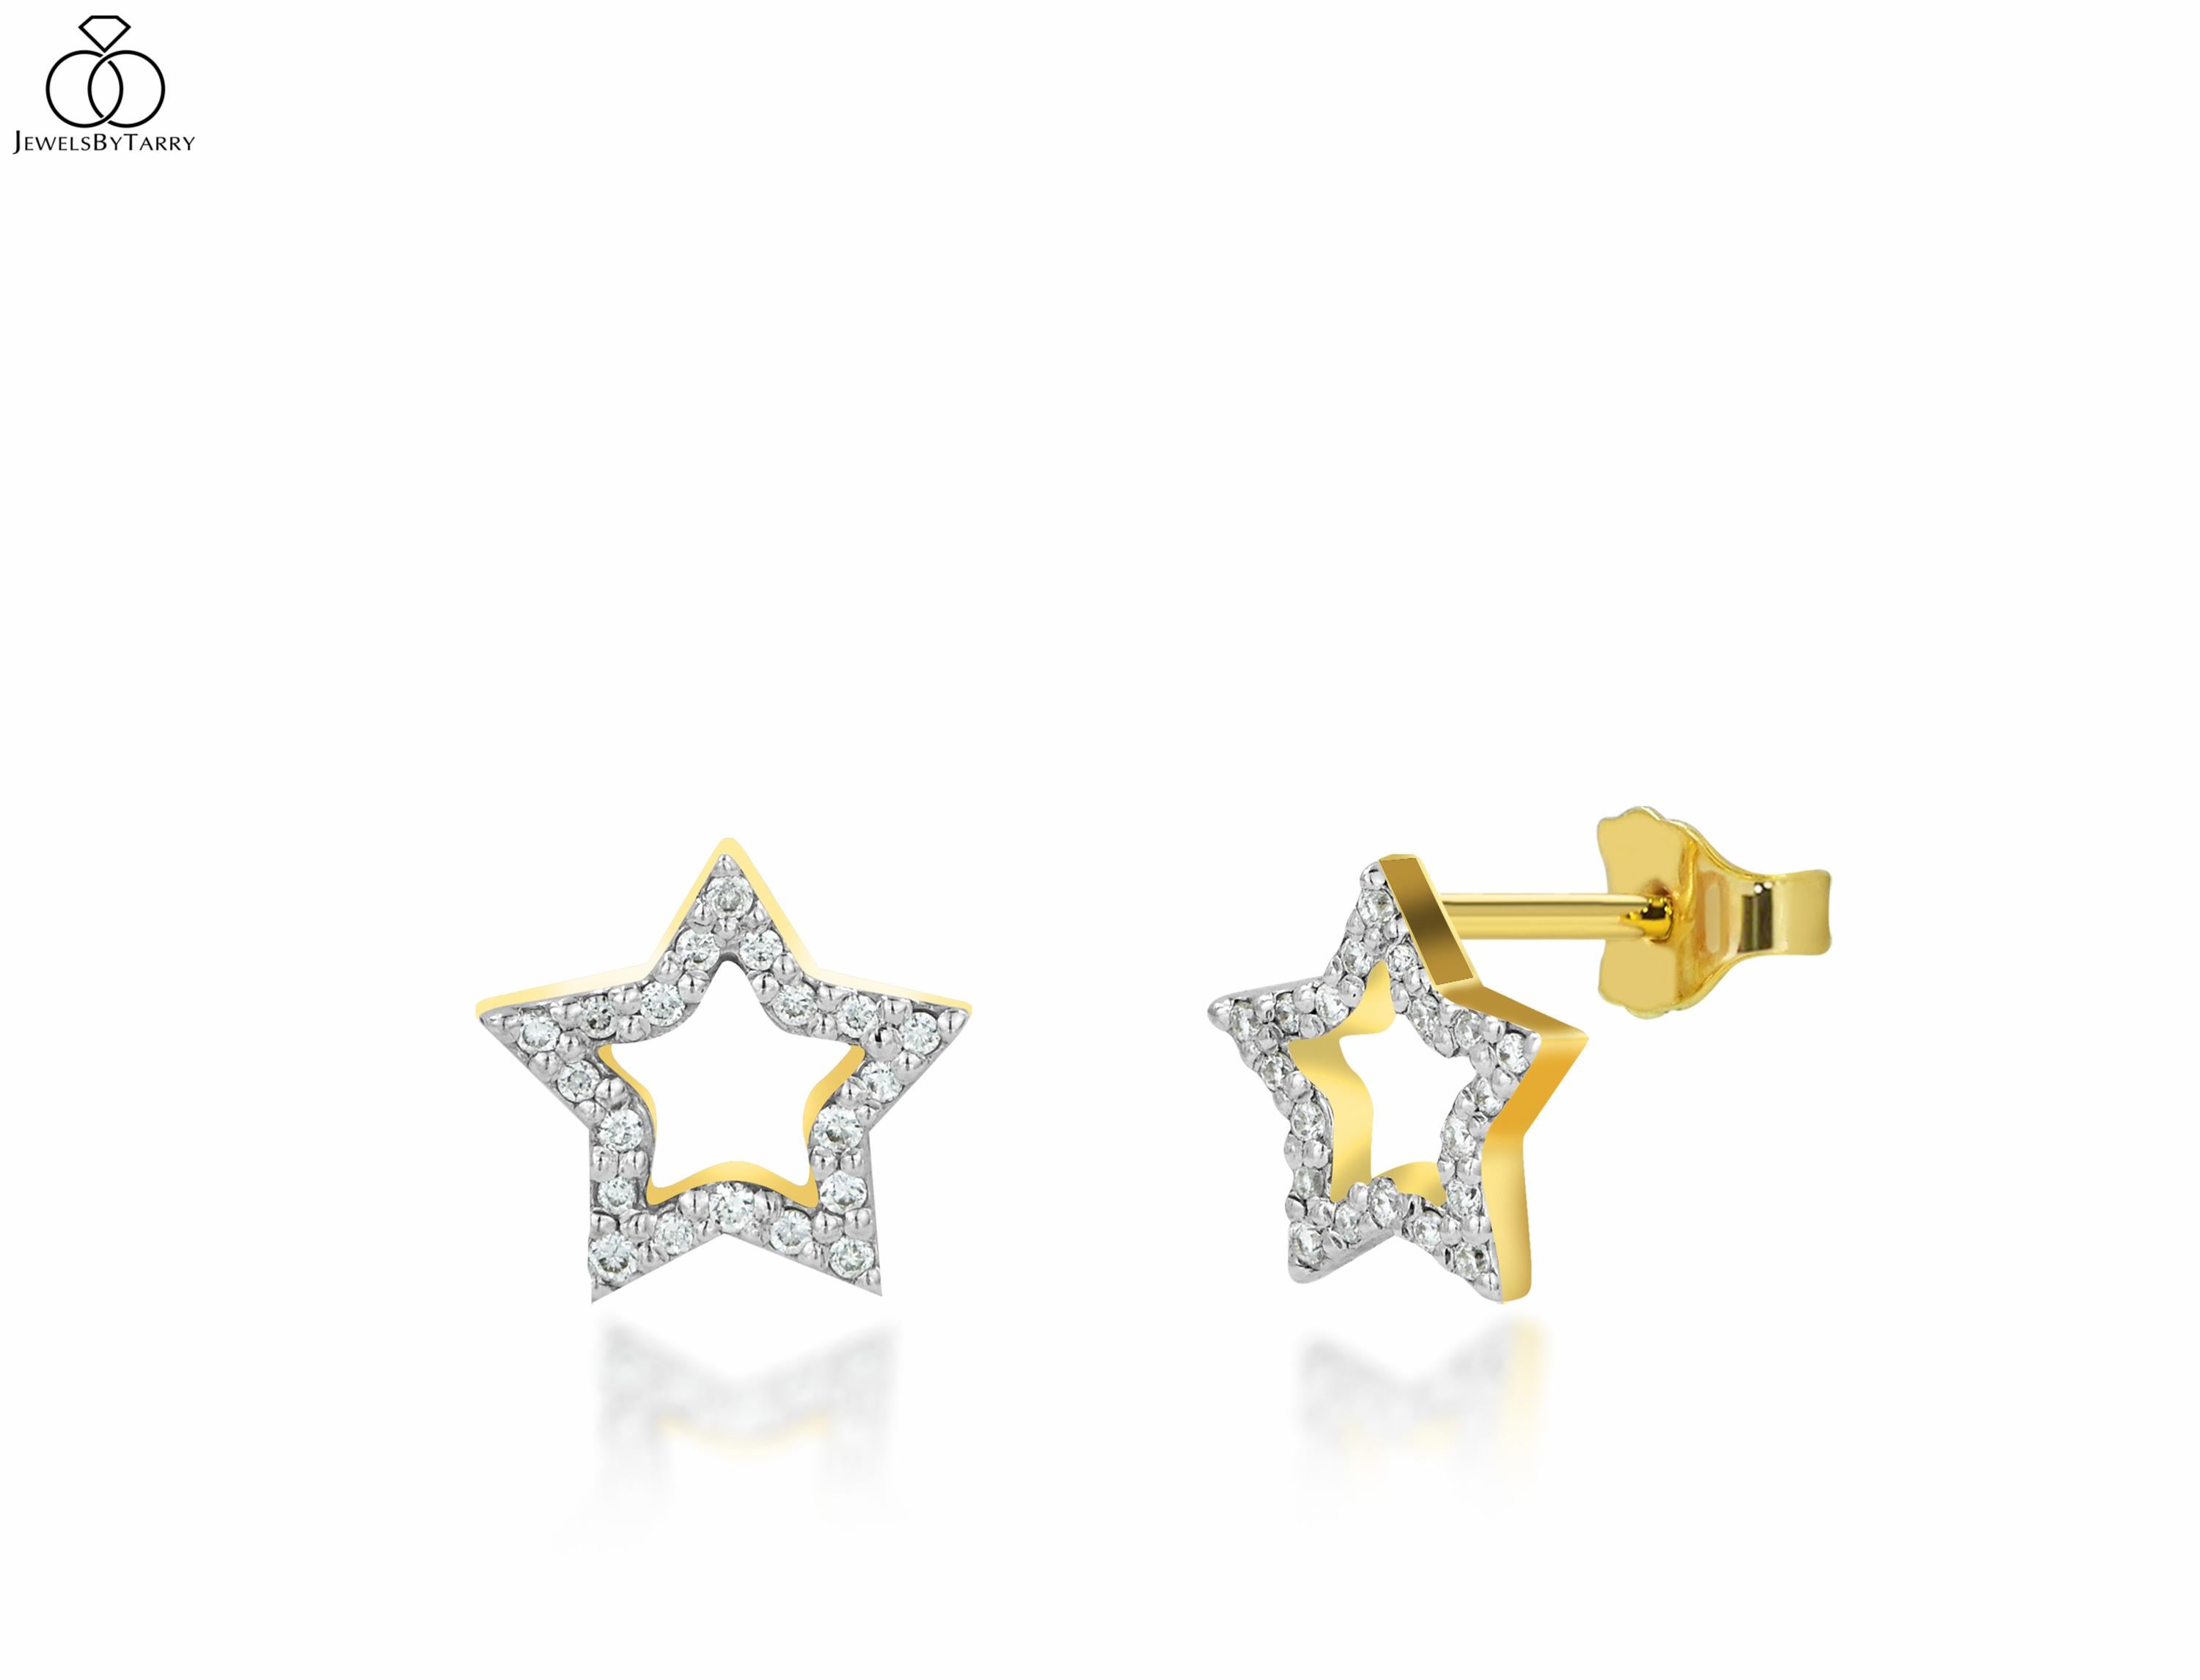 Tiny Diamond Star Stud Earrings are made of 14k solid gold available in three colors of gold, White Gold / Rose Gold / White Gold.

These Dainty Stud Earrings in 14k Gold featuring shiny brilliant round cut natural diamonds set by master setter in